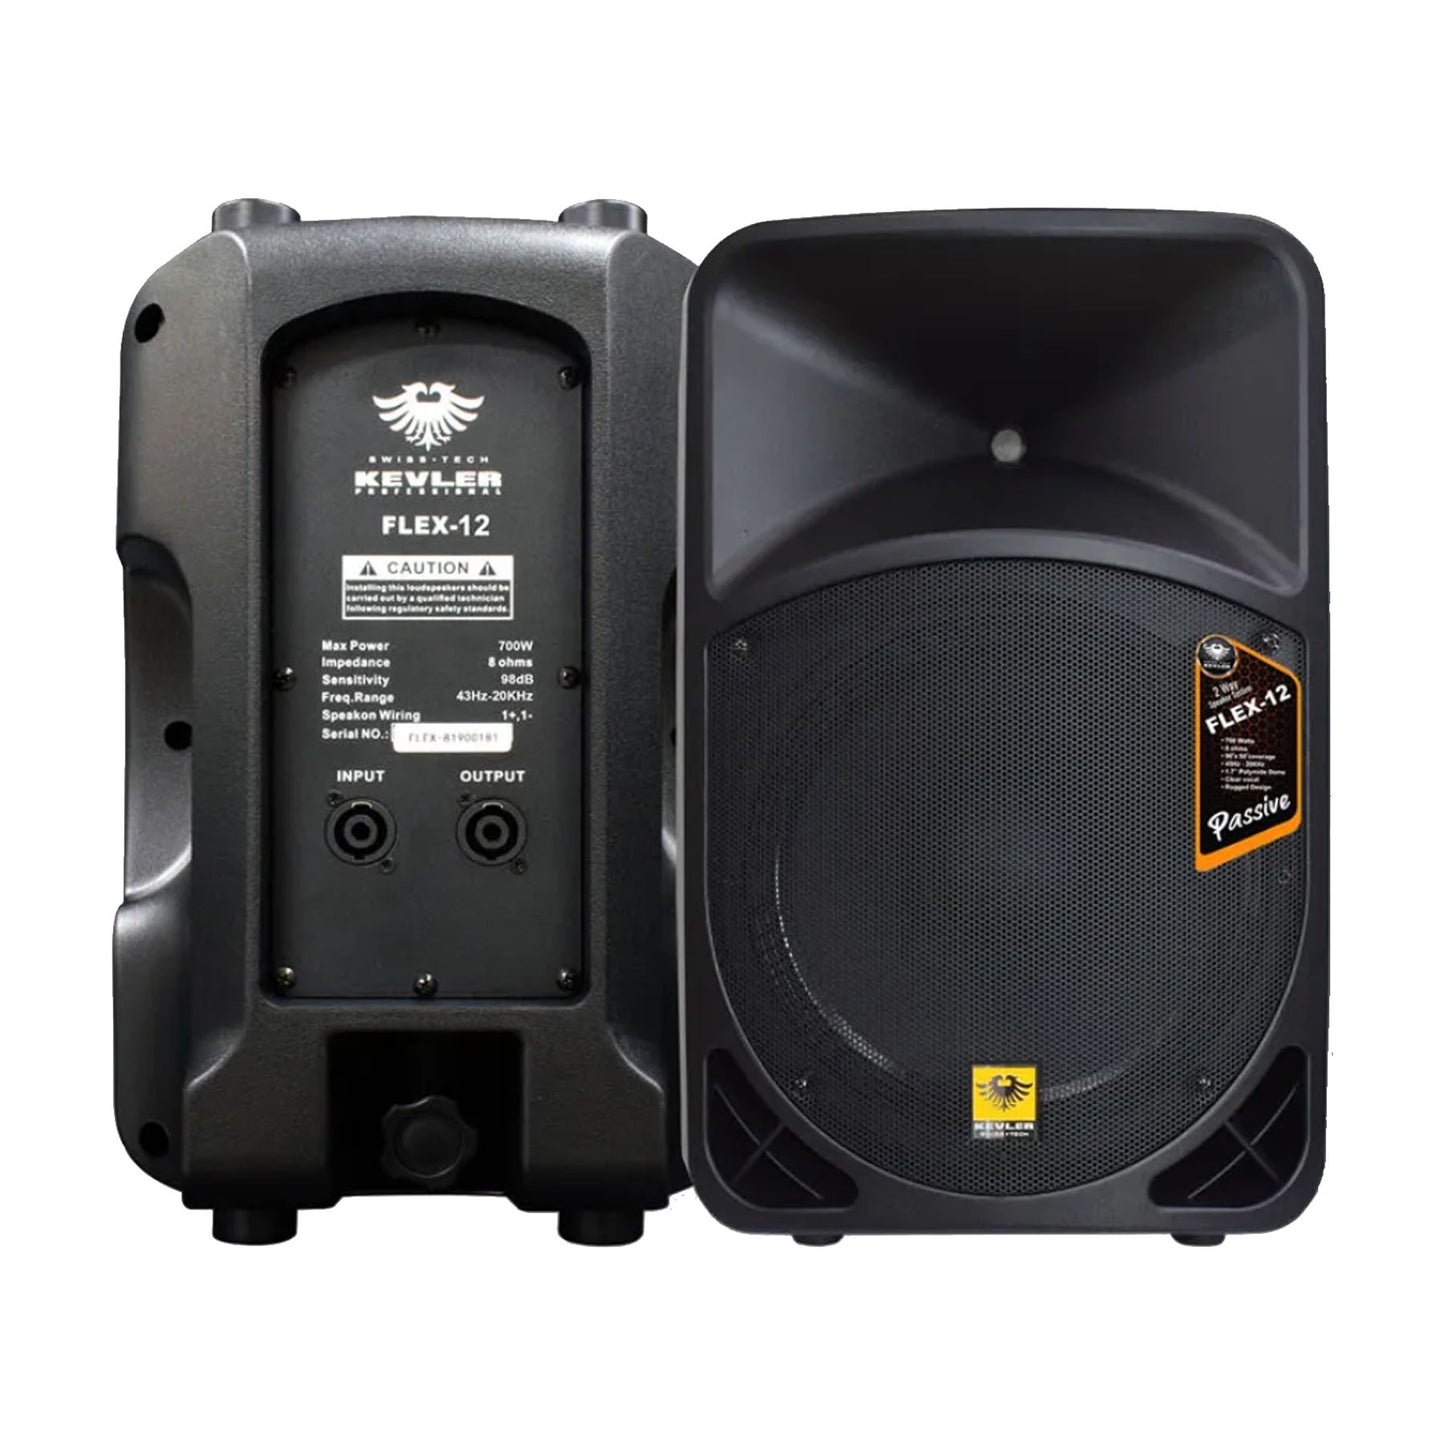 KEVLER FLEX-12 12" 700W 2-Way Bass Reflex Range Passive Loud Speaker (Pair) with Multiple Handles, Bottom Pole Mount, Multi Angle Enclosure and Easy Daisy-Chain Loop Connection